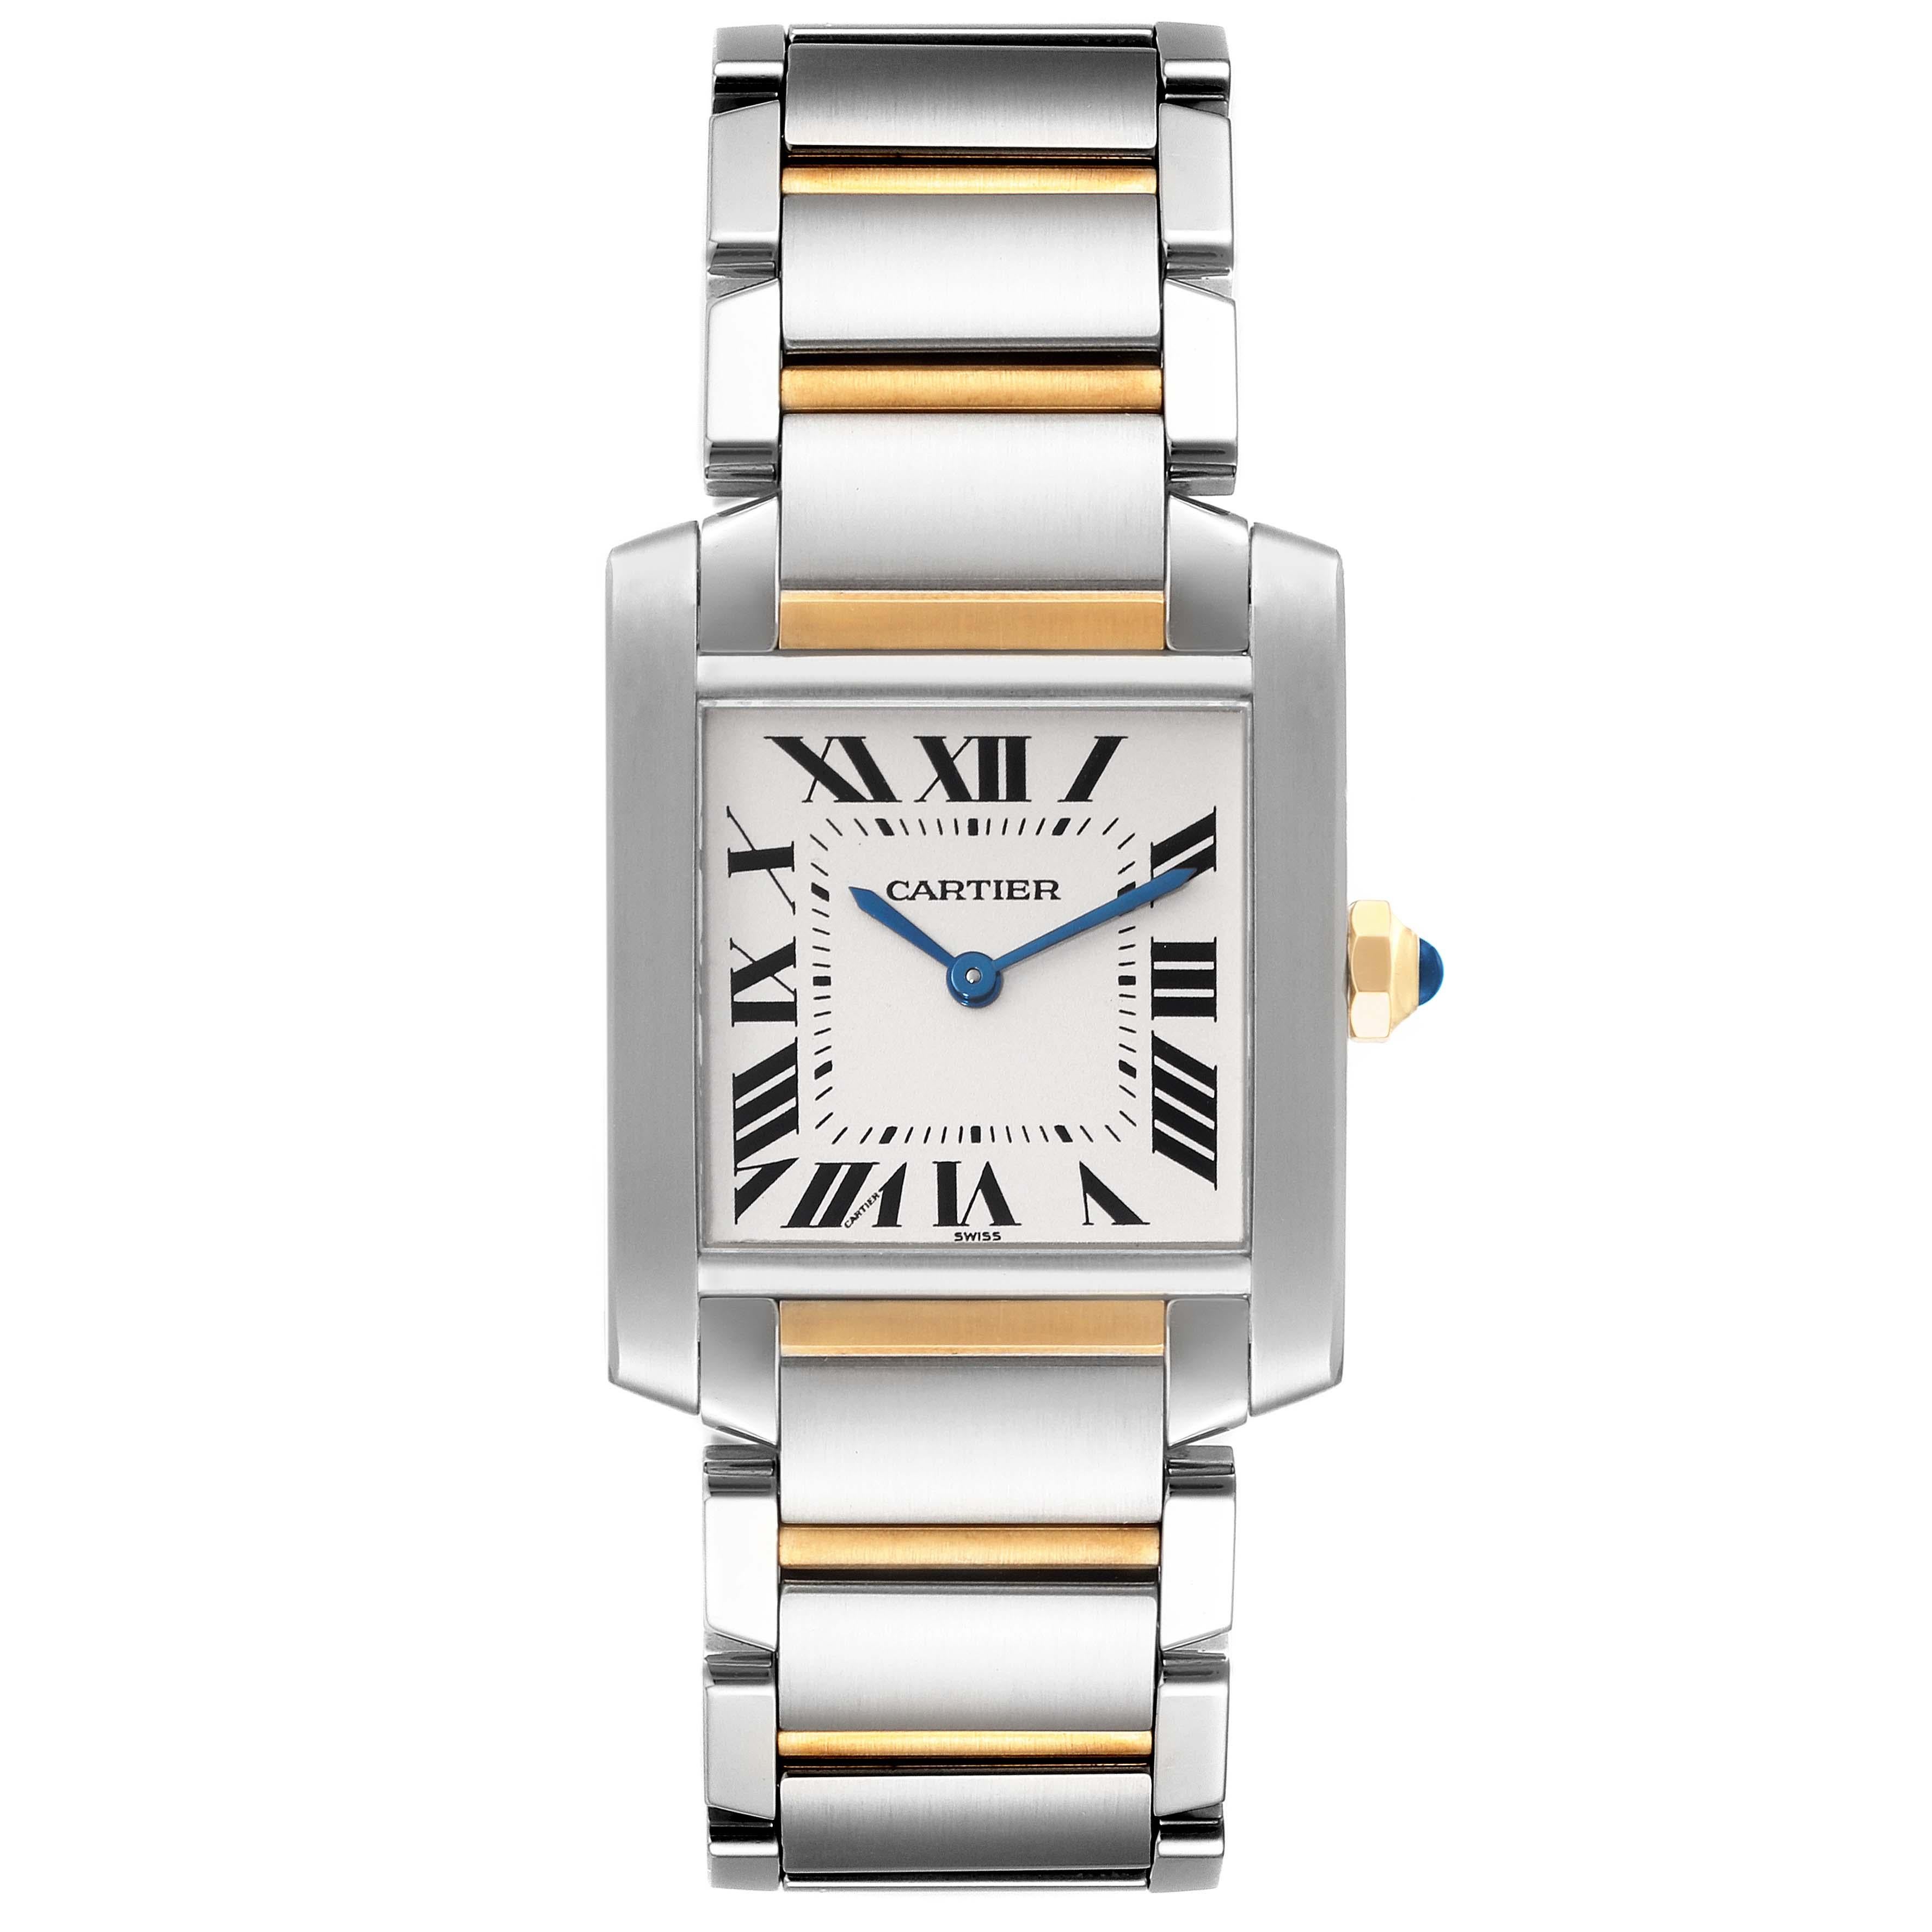 Cartier Tank Francaise Steel Yellow Gold Mens Watch W51006Q4 Box Papers. Original Cartier quartz movement. Rectangular stainless steel 25.0 x 30.0 mm case. Octagonal 18K yellow gold crown set with a blue spinel cabochon. . Scratch resistant sapphire